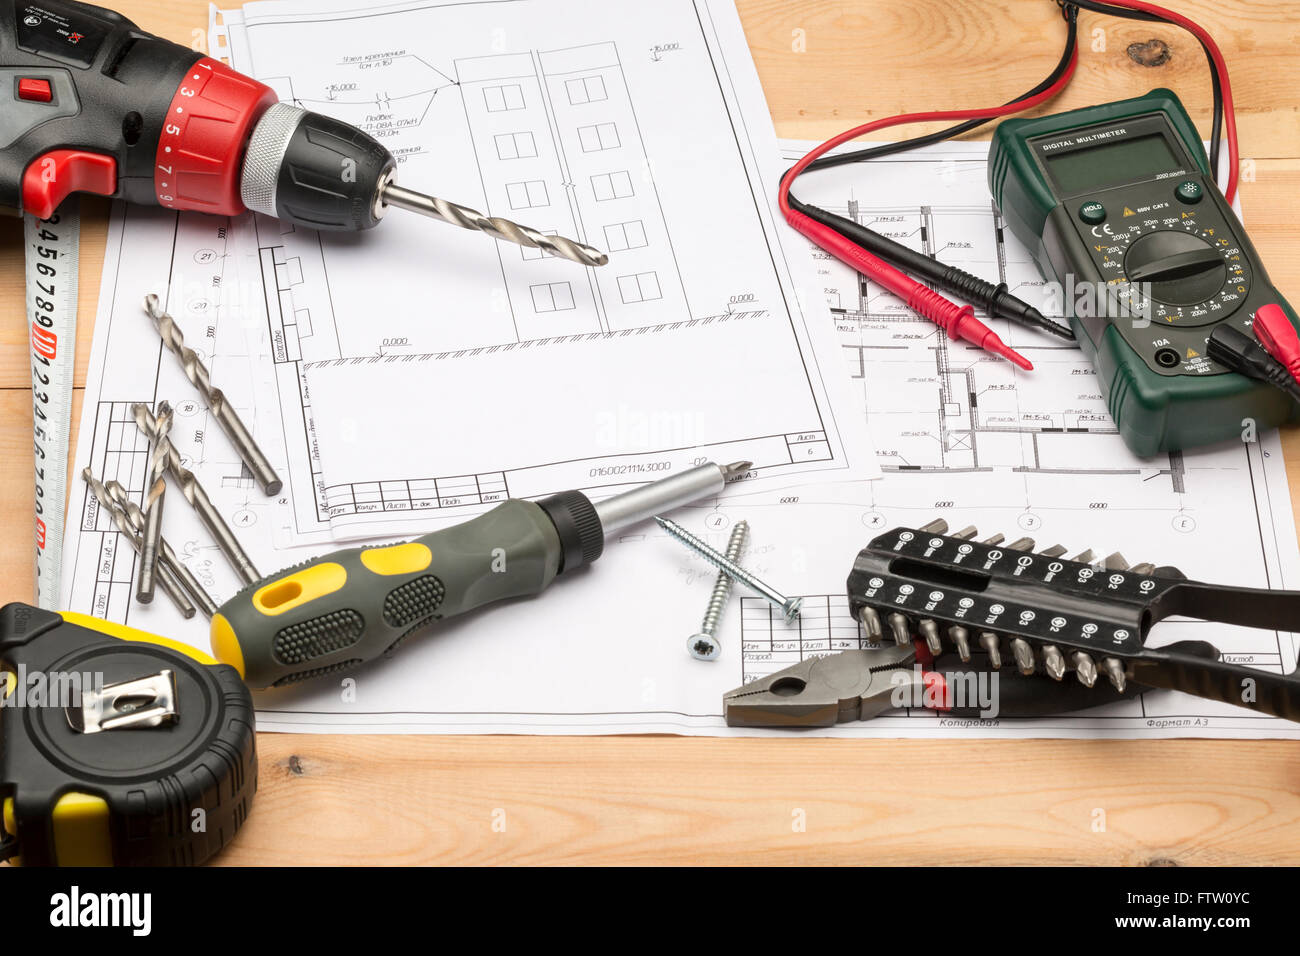 Set of different tools for repair and construction: multimeter, screwdriver, screws, project, wrench, hand tool Stock Photo